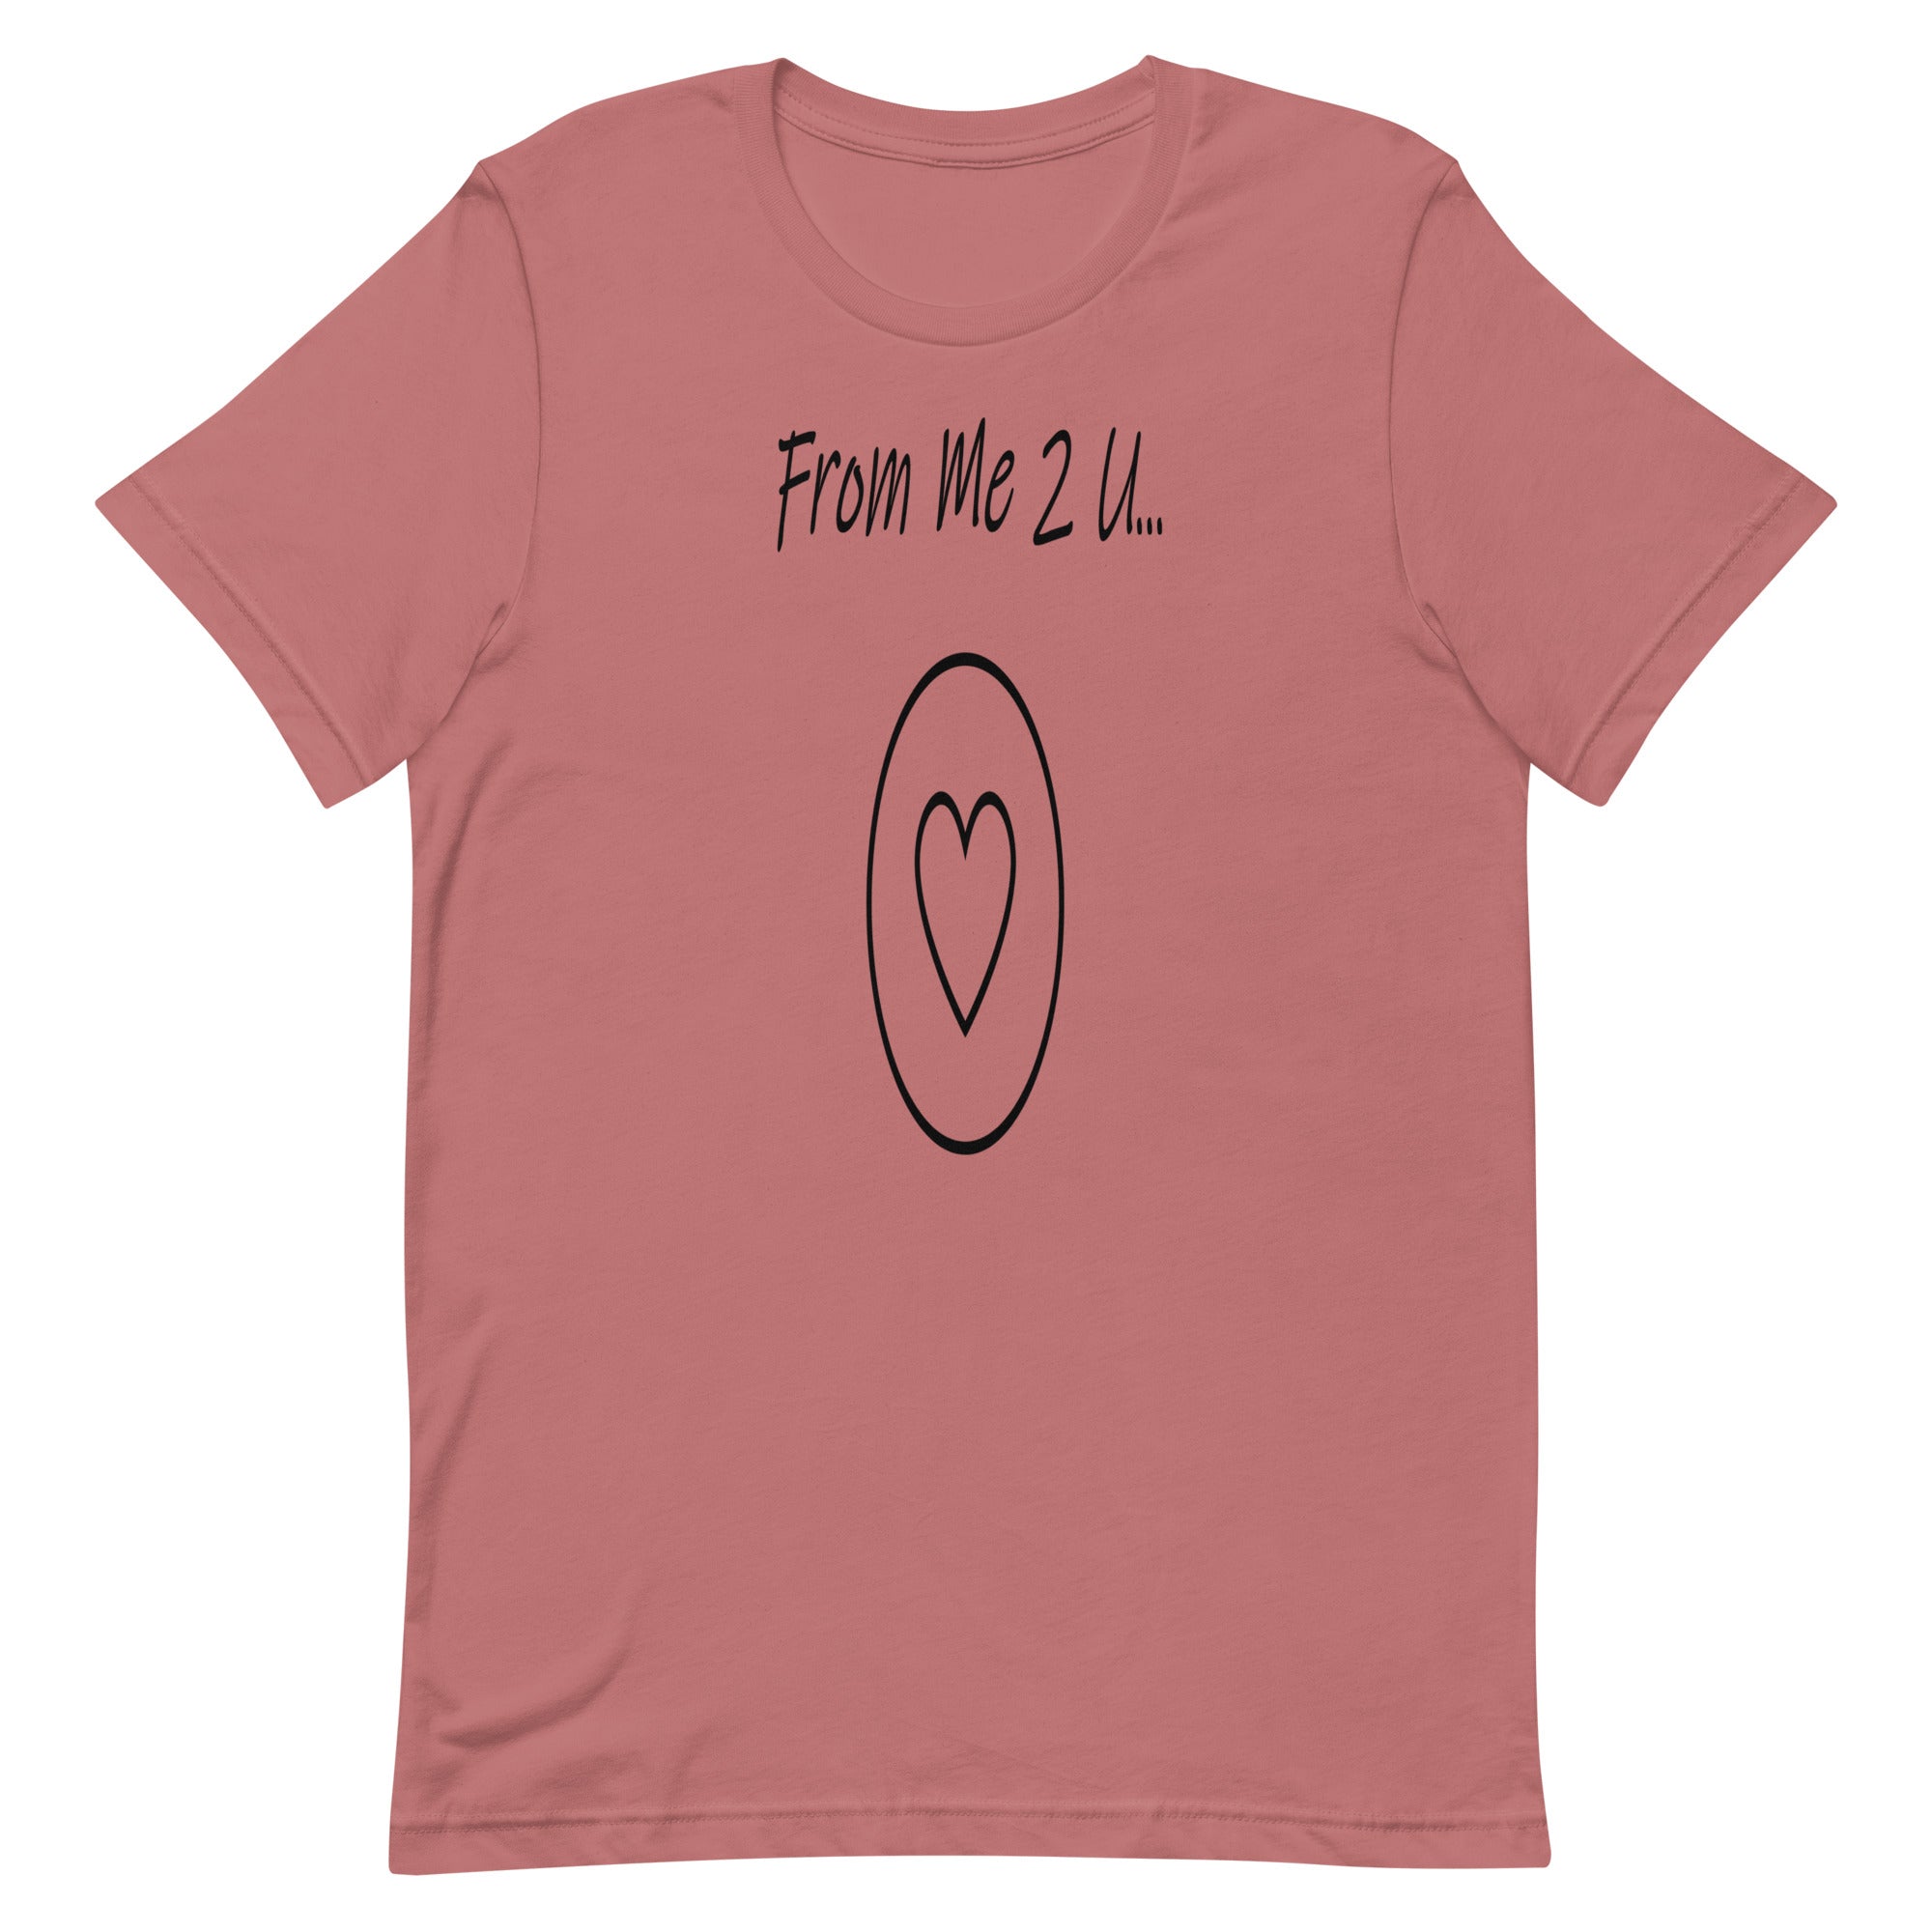 FROM ME 2 U...    Unisex t-shirt